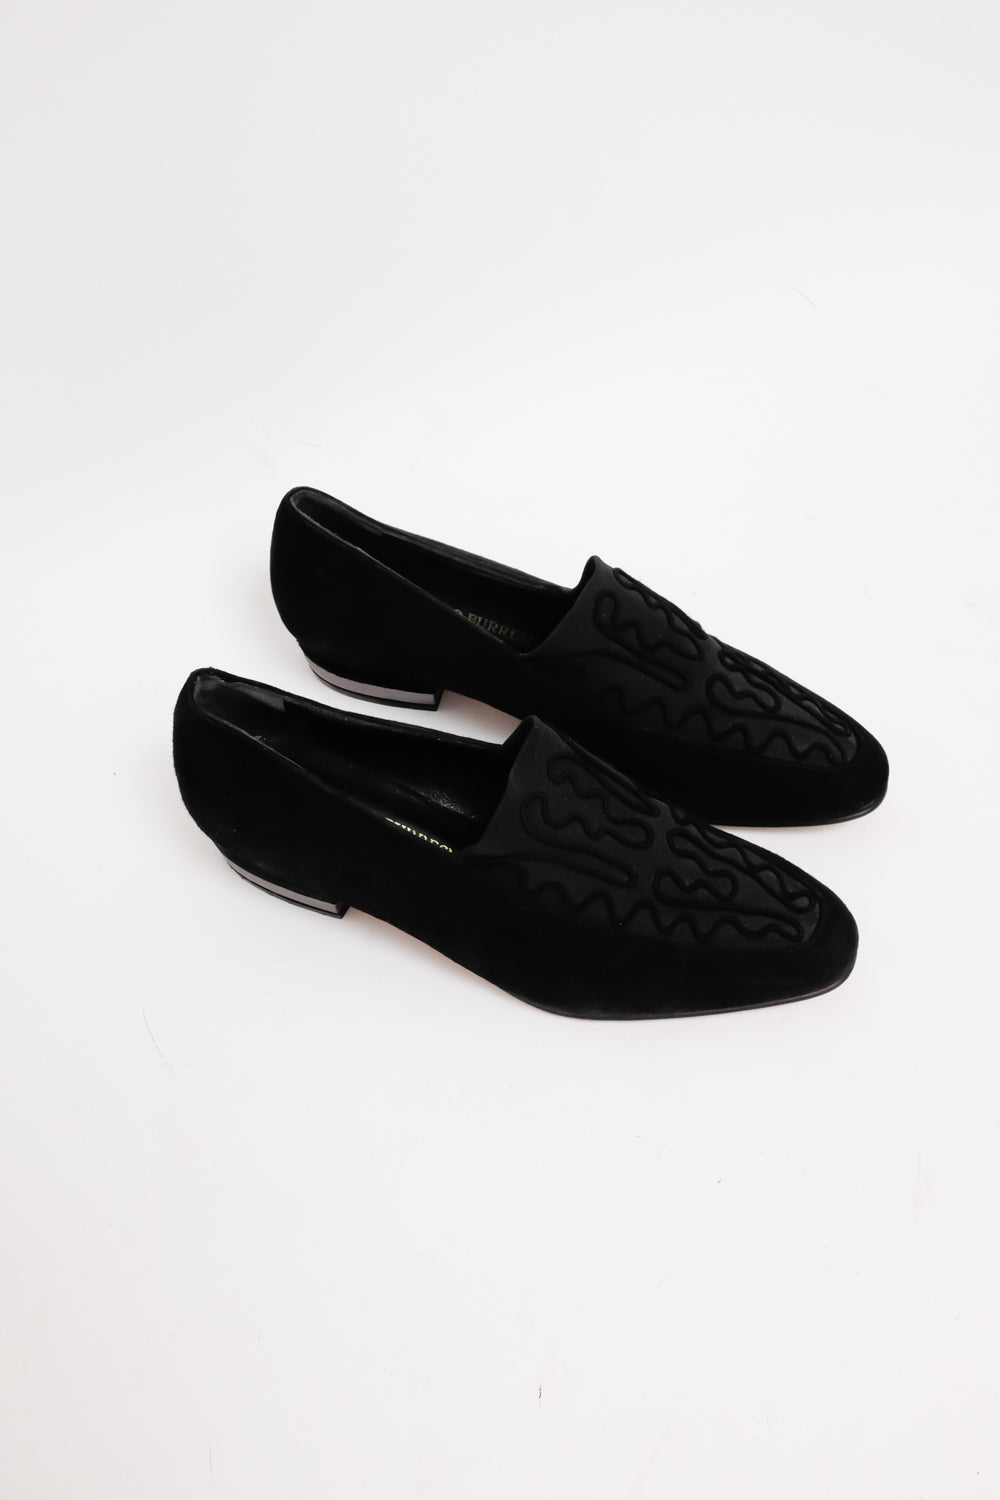 MARCO BURRESI ITALY BLACK LEATHER LOAFER